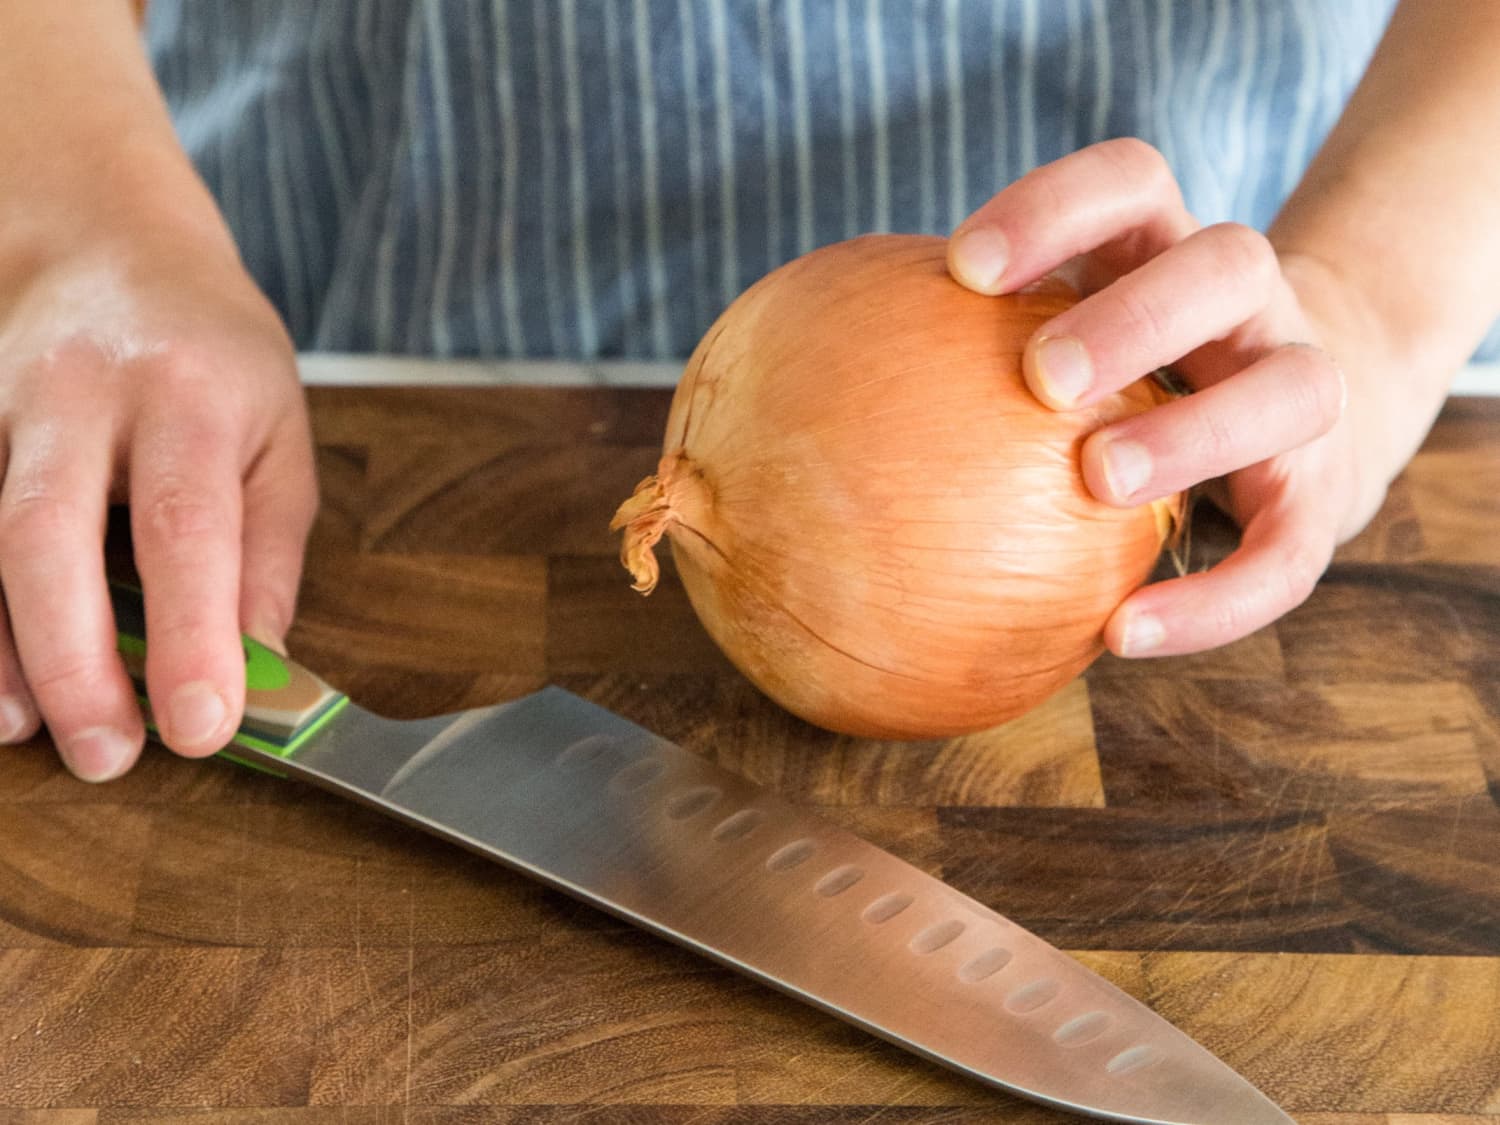 The More You Cut an Onion, The Stronger It Will Taste